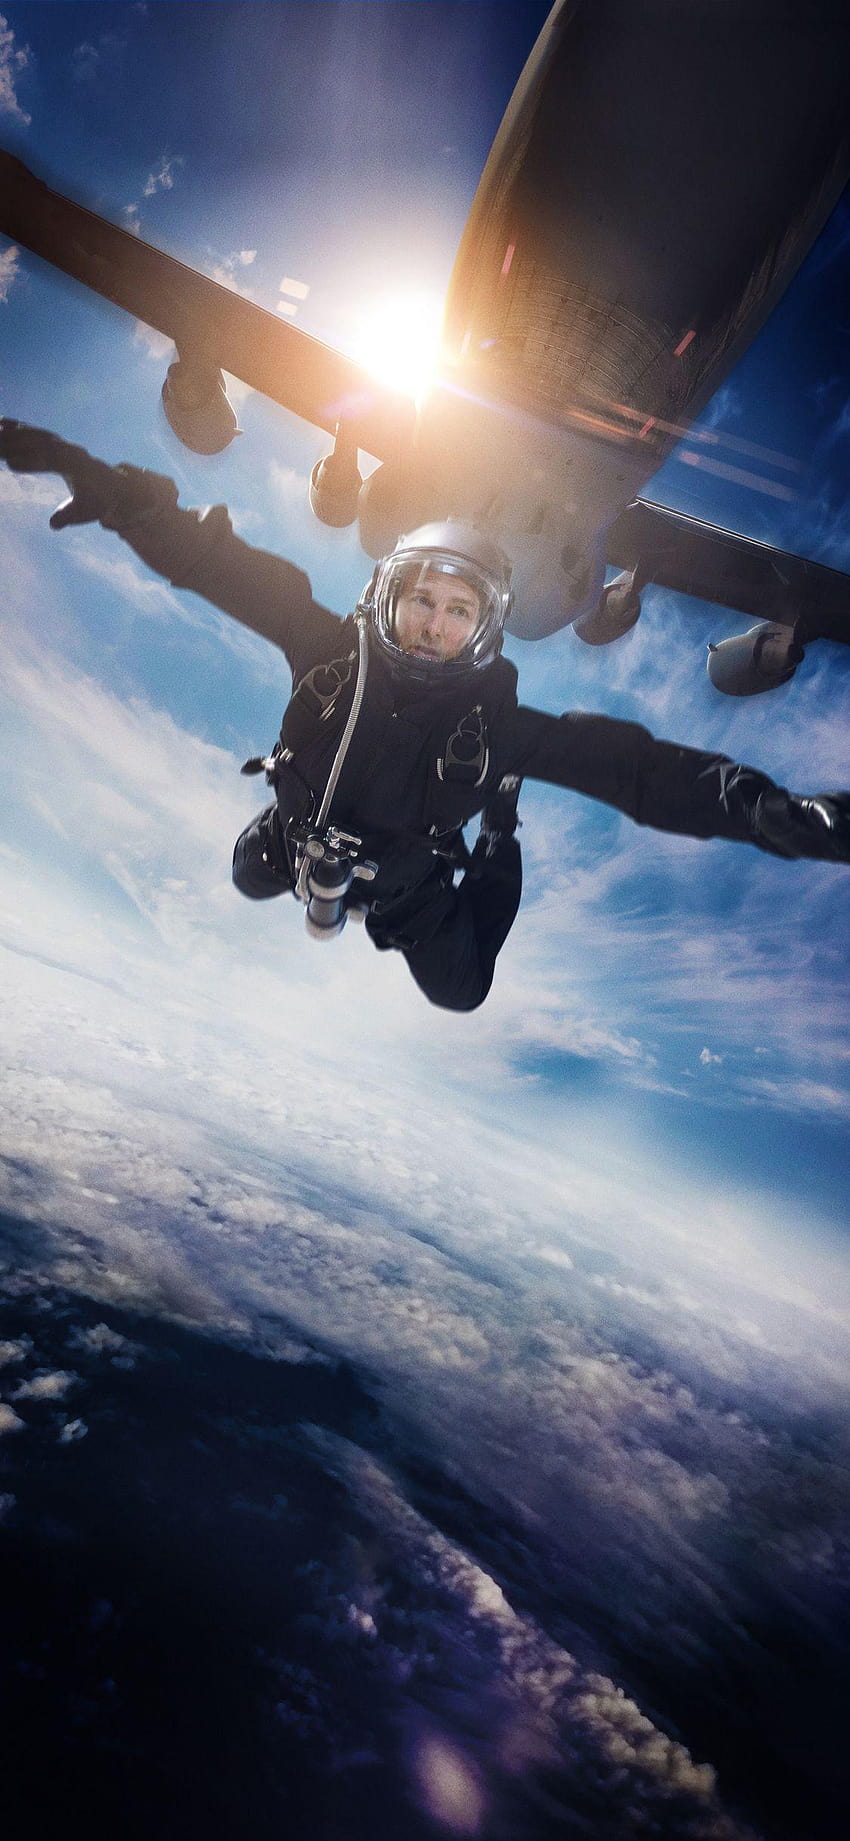 1125x2436 Mission Impossible Fallout Jumping Out Of Plane Poster, missione impossibile iphone Sfondo del telefono HD